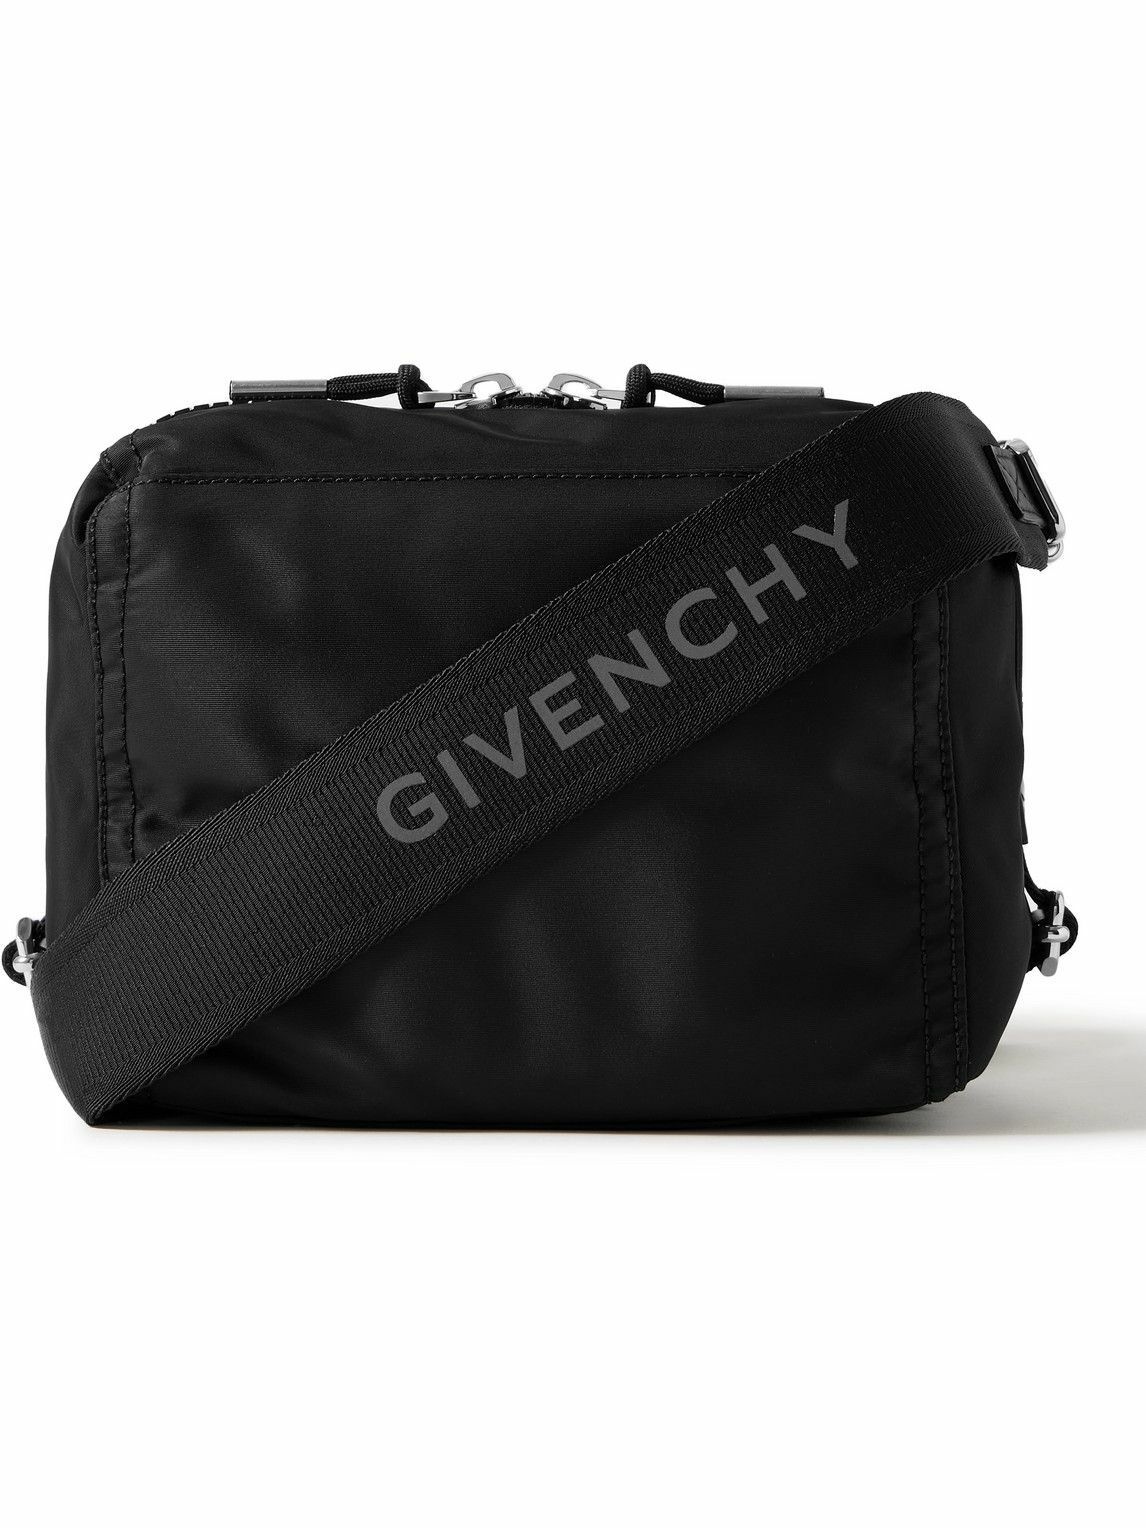 Givenchy - Pandora Small Leather-Trimmed Nylon Messenger Bag Givenchy